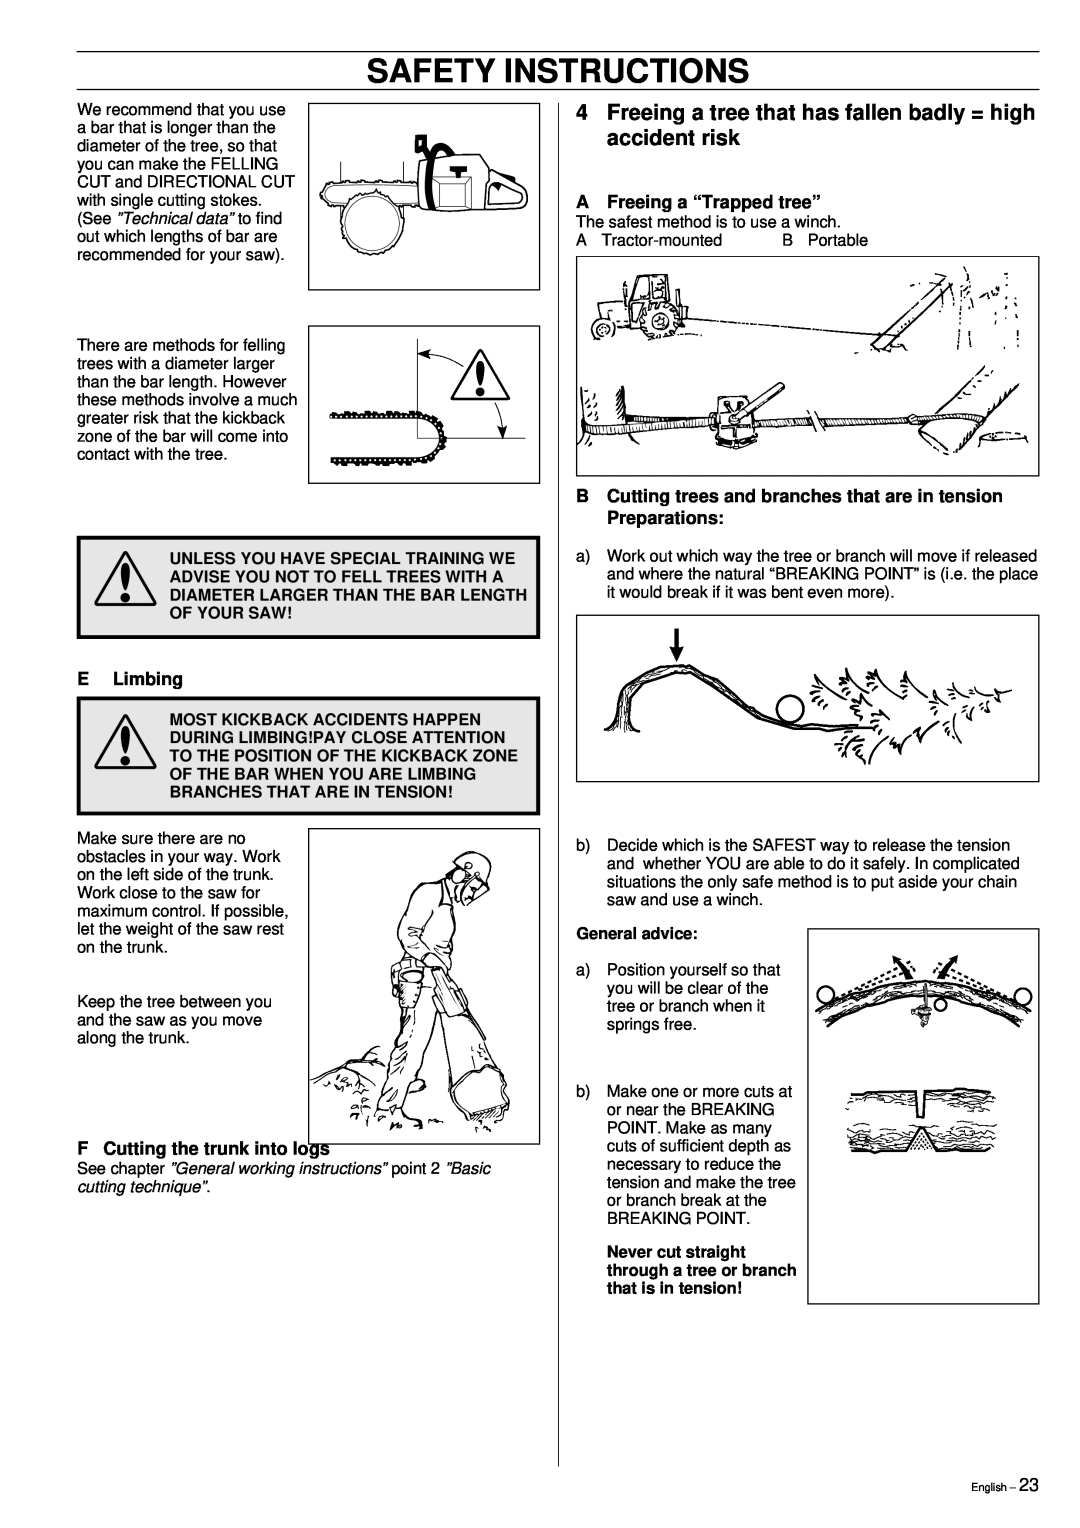 Husqvarna 355 manual E Limbing, F Cutting the trunk into logs, AFreeing a “Trapped tree”, Safety Instructions 